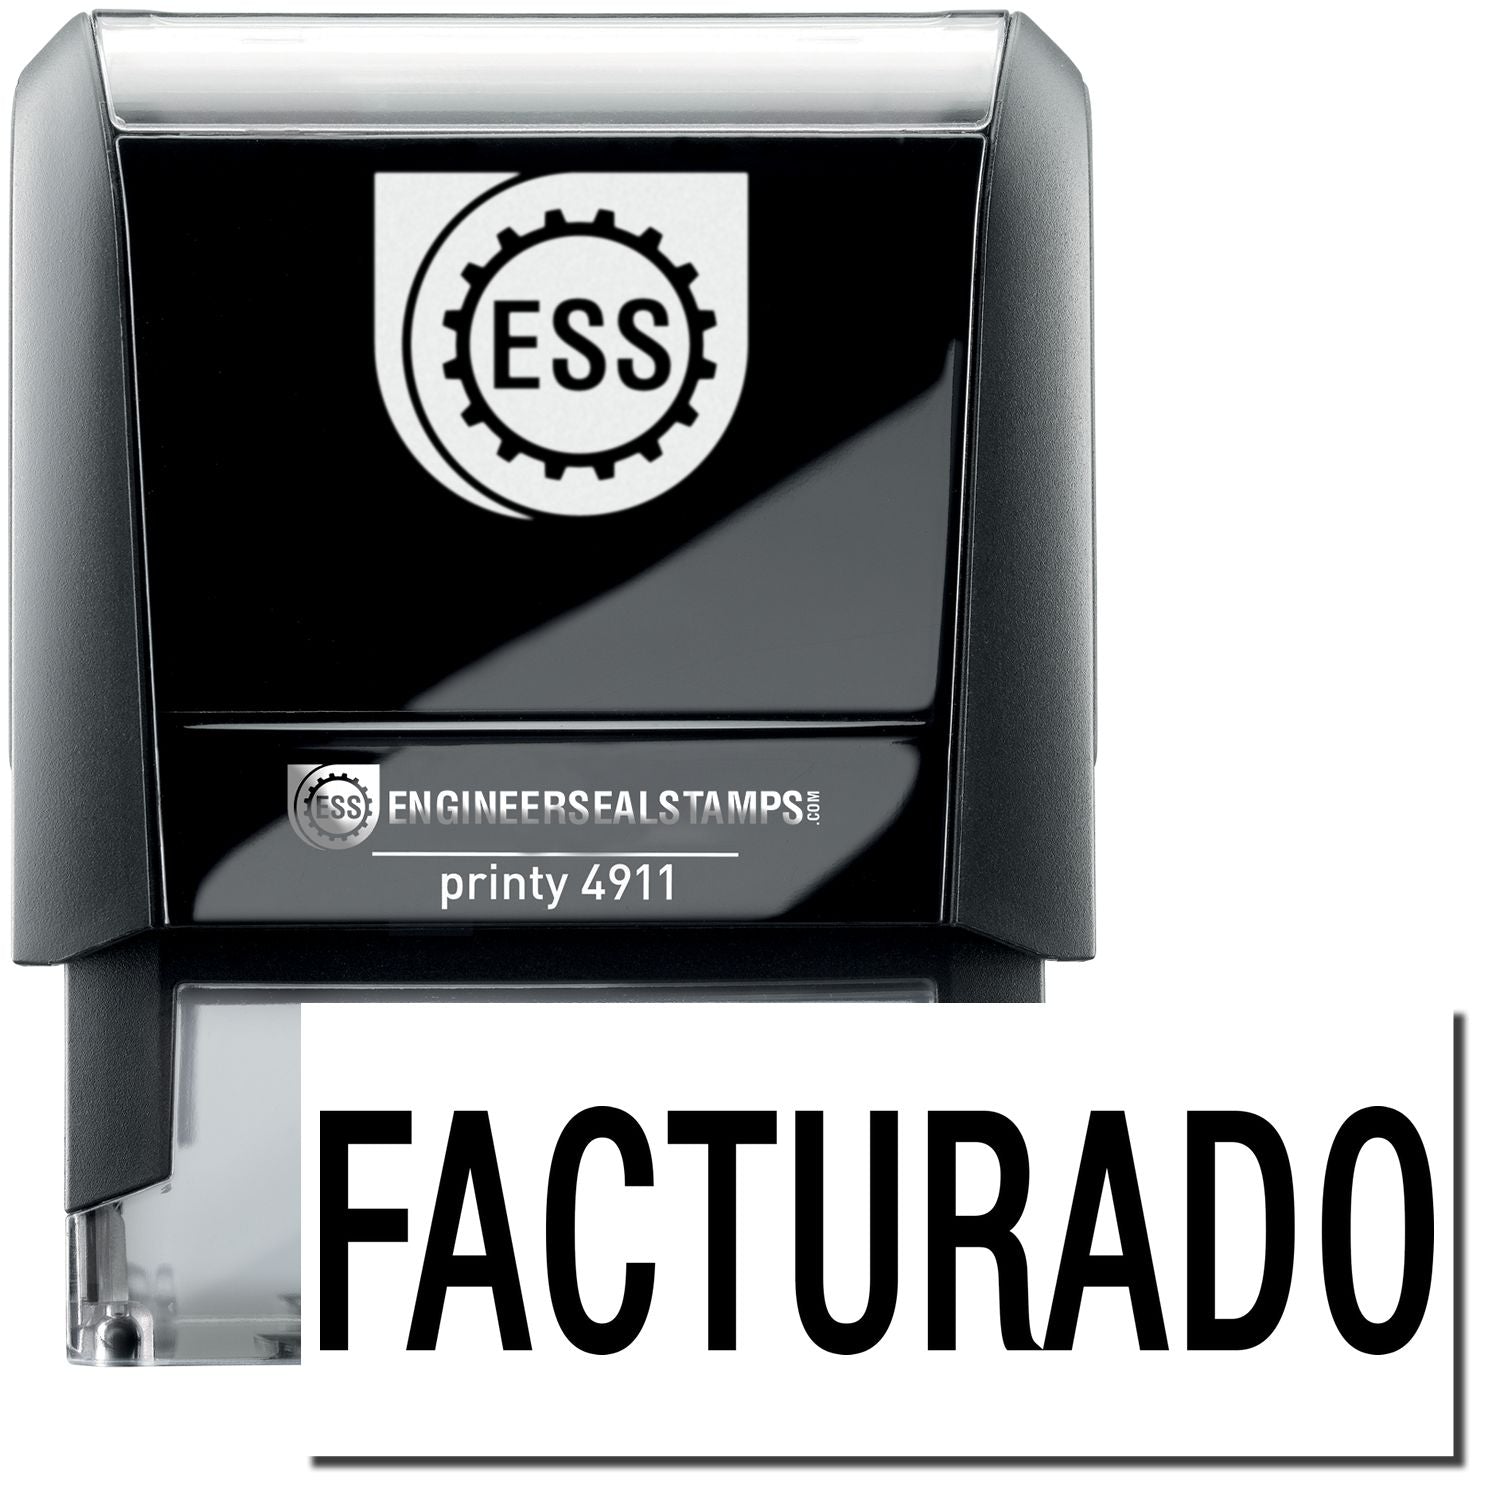 A self-inking stamp with a stamped image showing how the text "FACTURADO" is displayed after stamping.